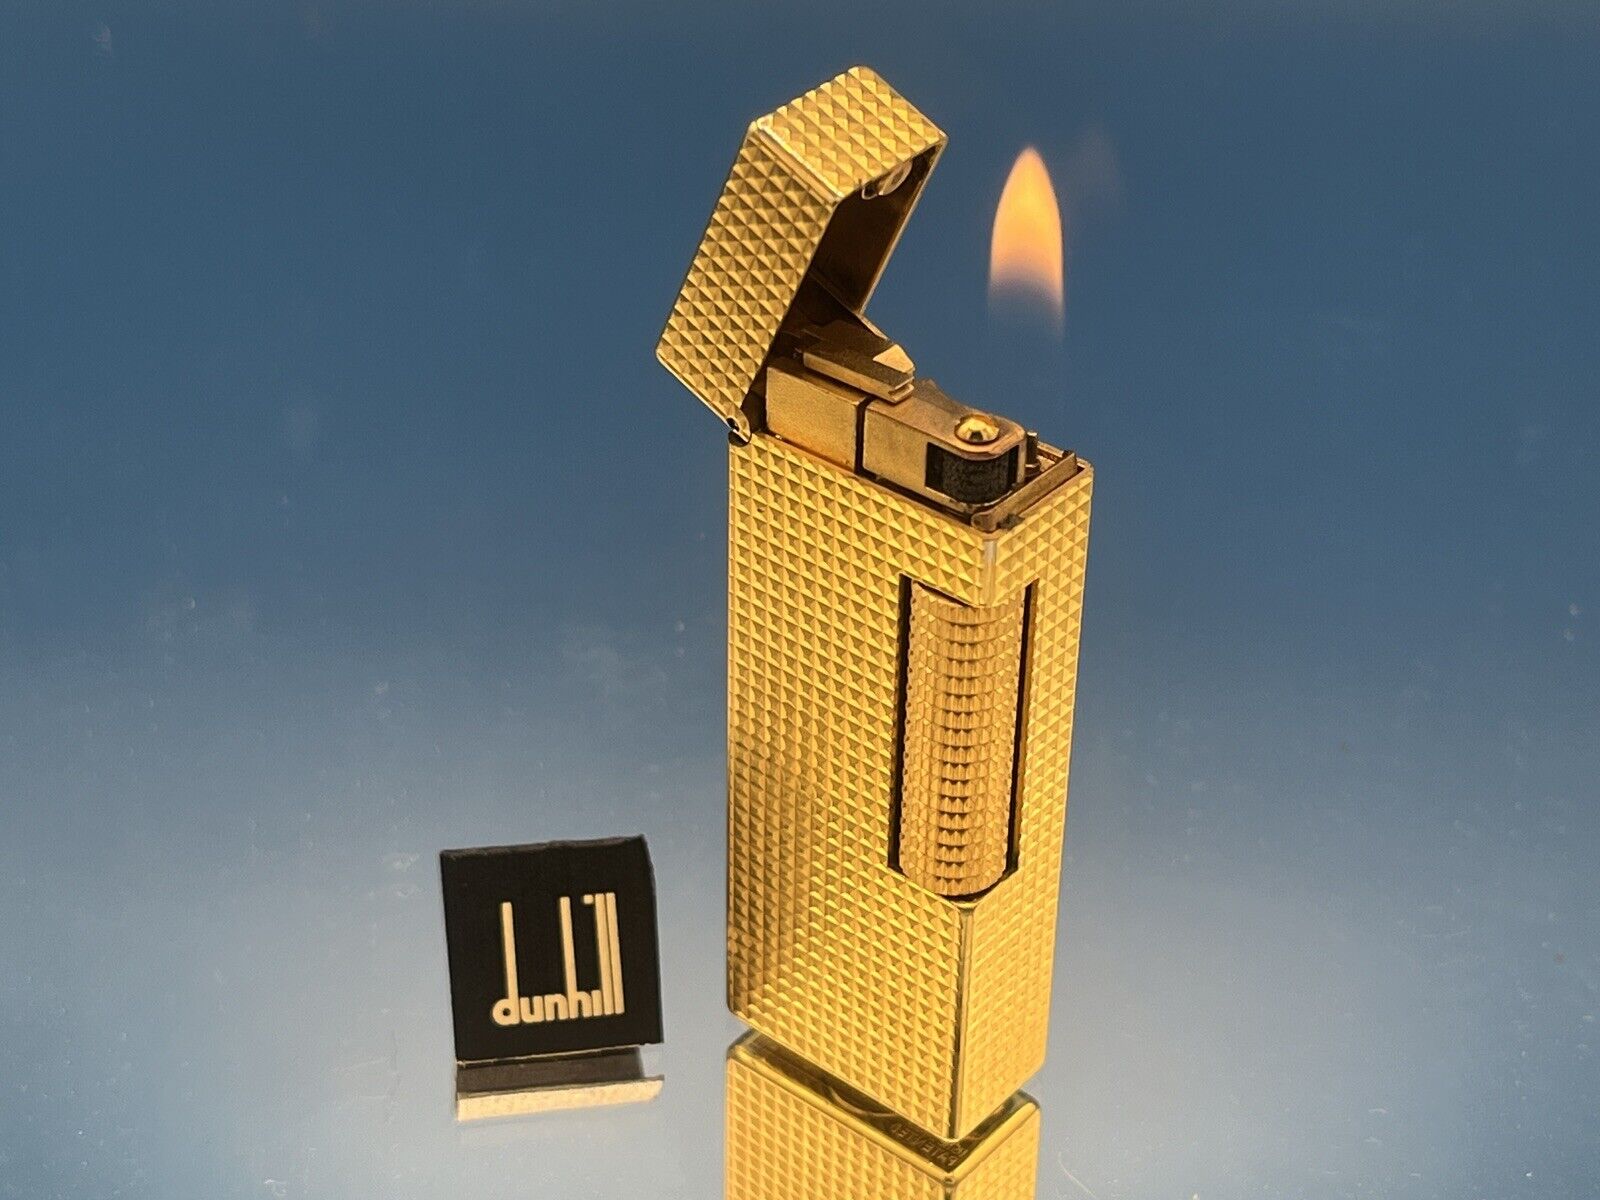 1980 Dunhill Rollagas, Gold Filled Hobnail Lighter #274 Warranted